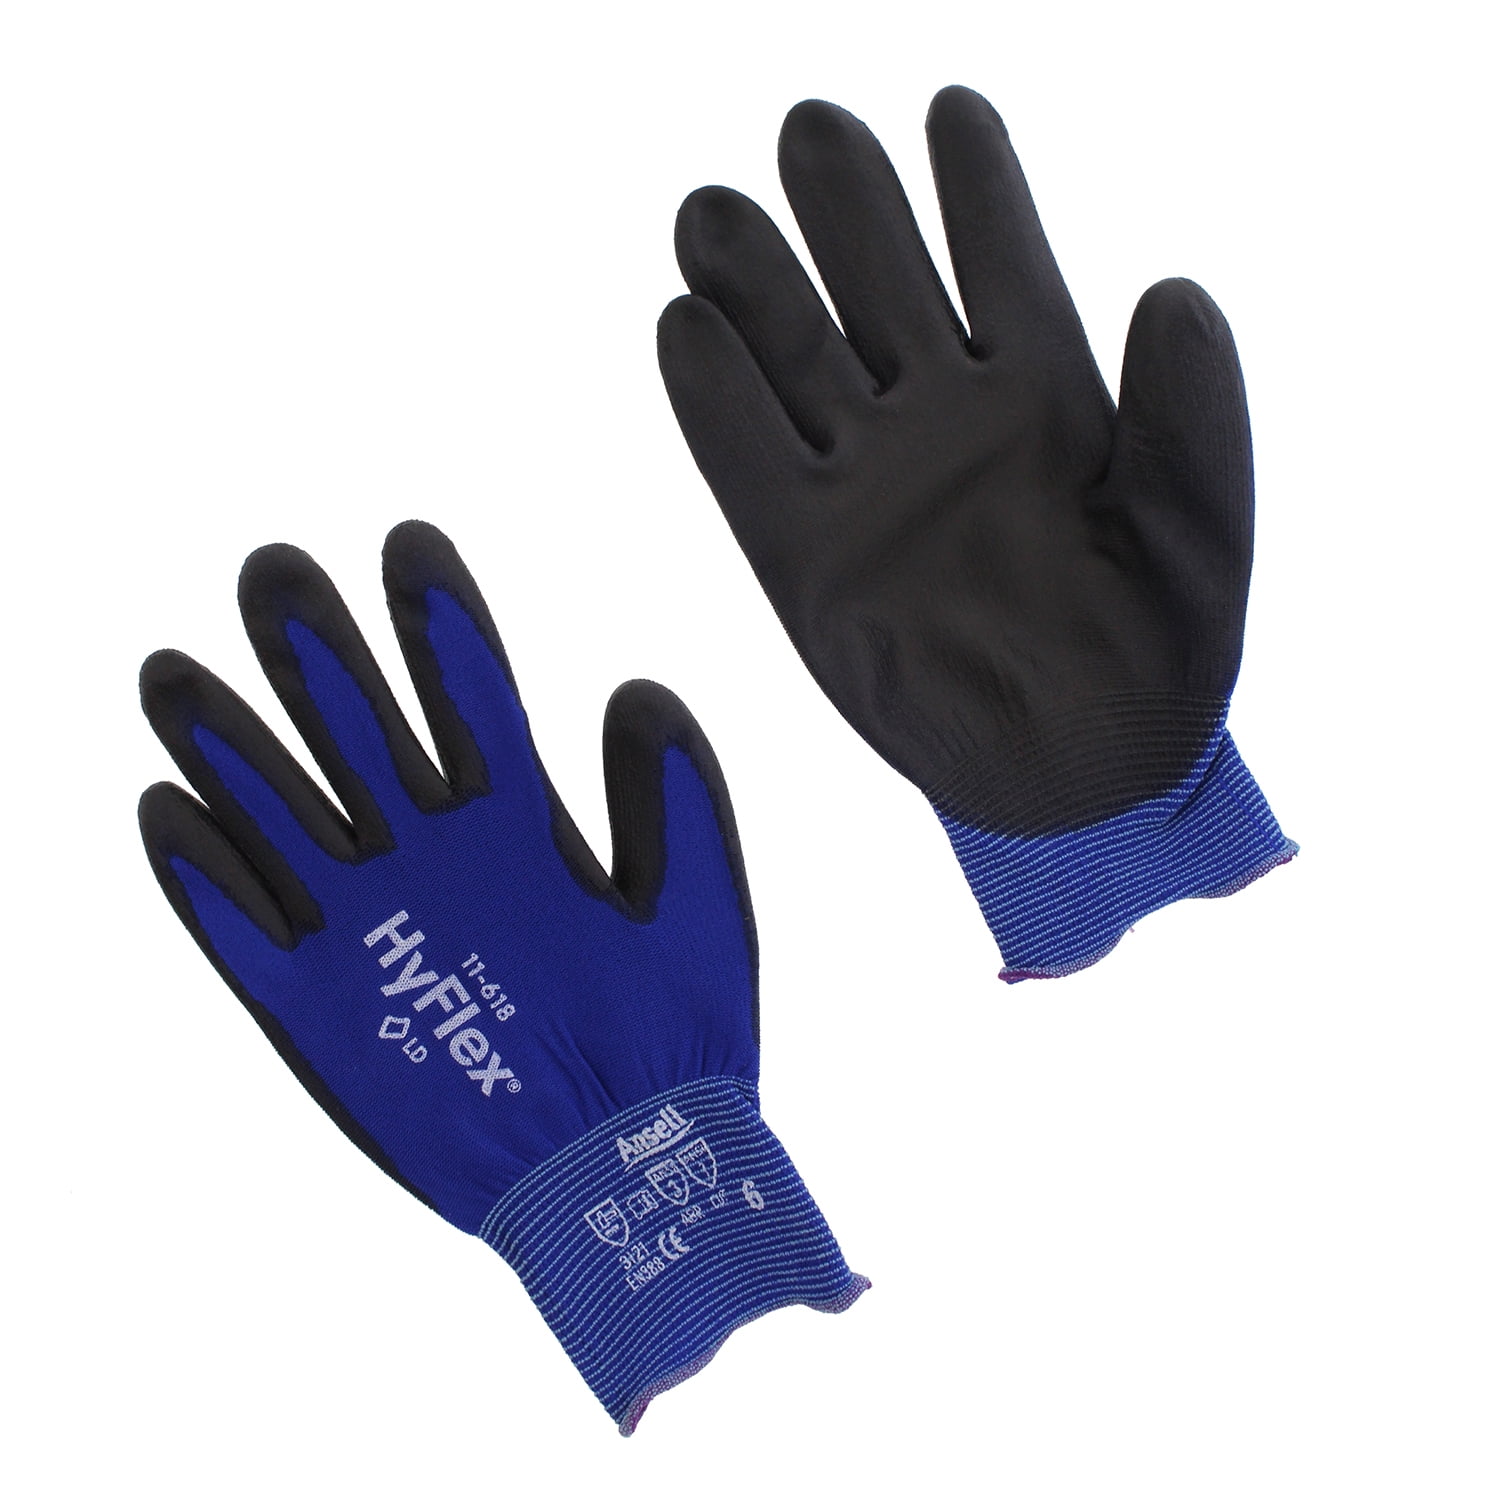 12 Pairs Ansell Hyflex 11-501 Cut Resistant Gloves Blue Nitrile Small Size 7 for sale online 